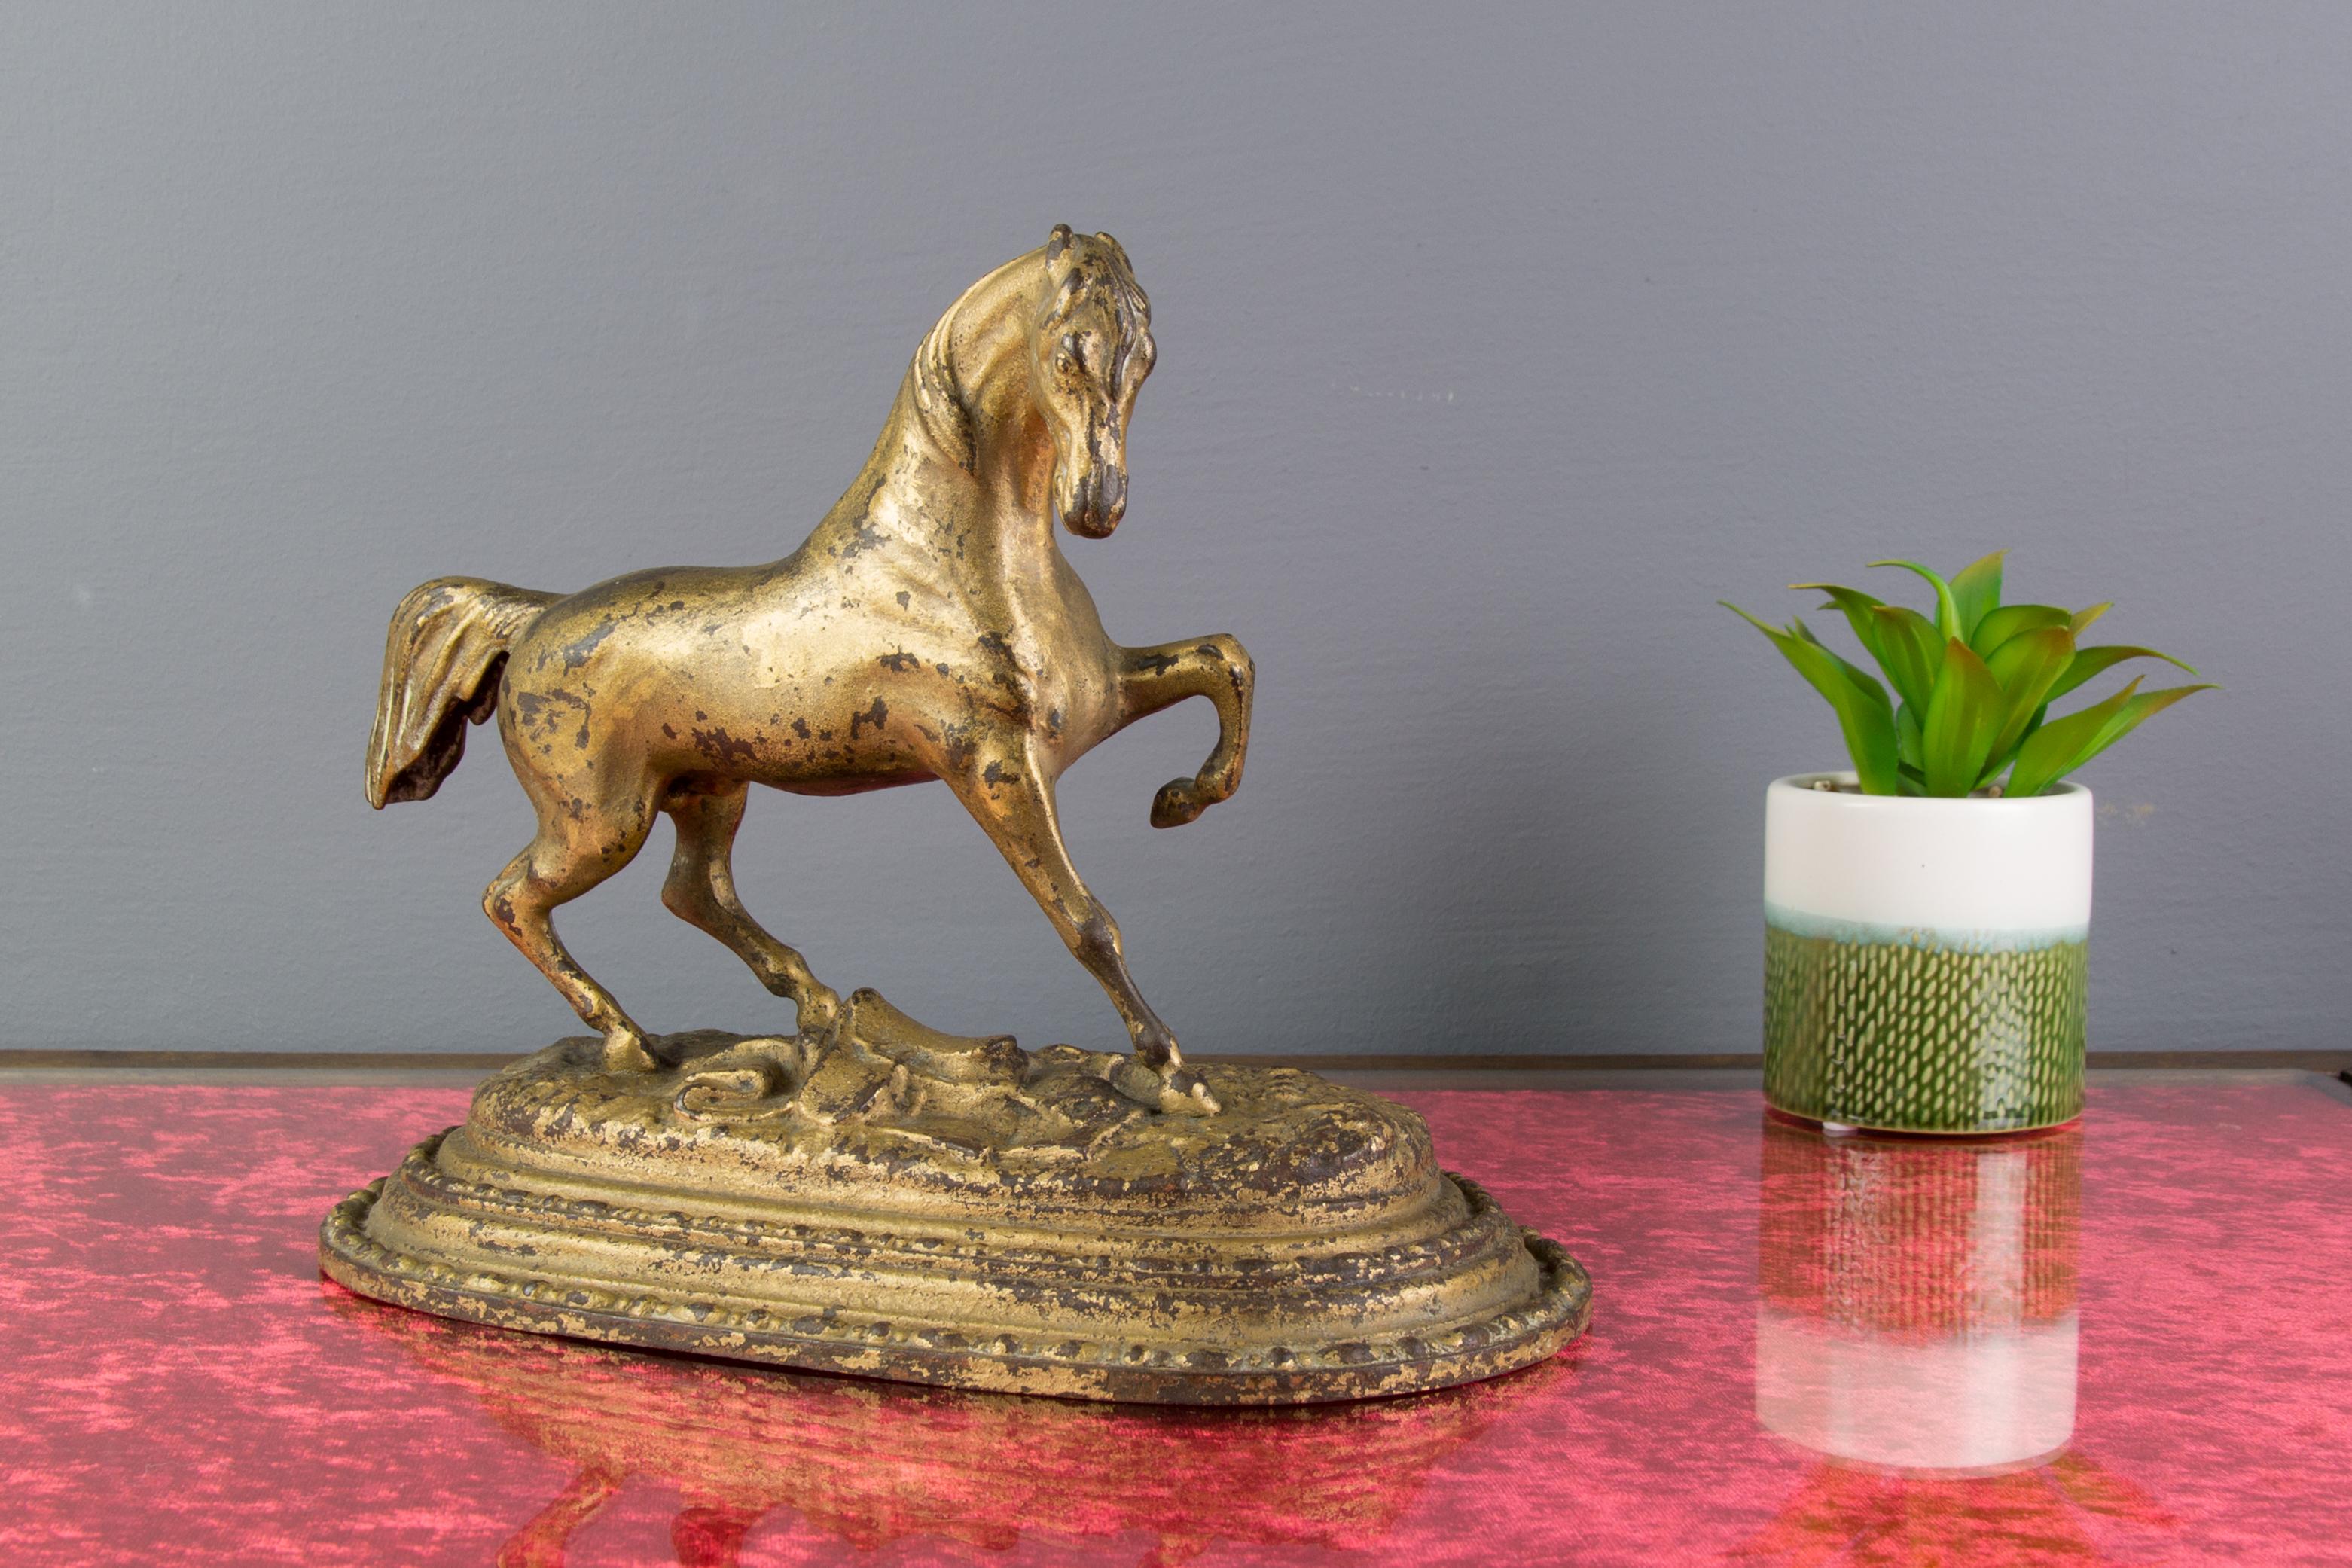 A beautiful statue of a horse, made of iron, golden-painted, raised on an iron socle plinth. Detailed and heavy.
Dimensions: height 21 cm / 8.26 in, width 13 cm / 5.11 in, length 24 cm / 9.44 in.